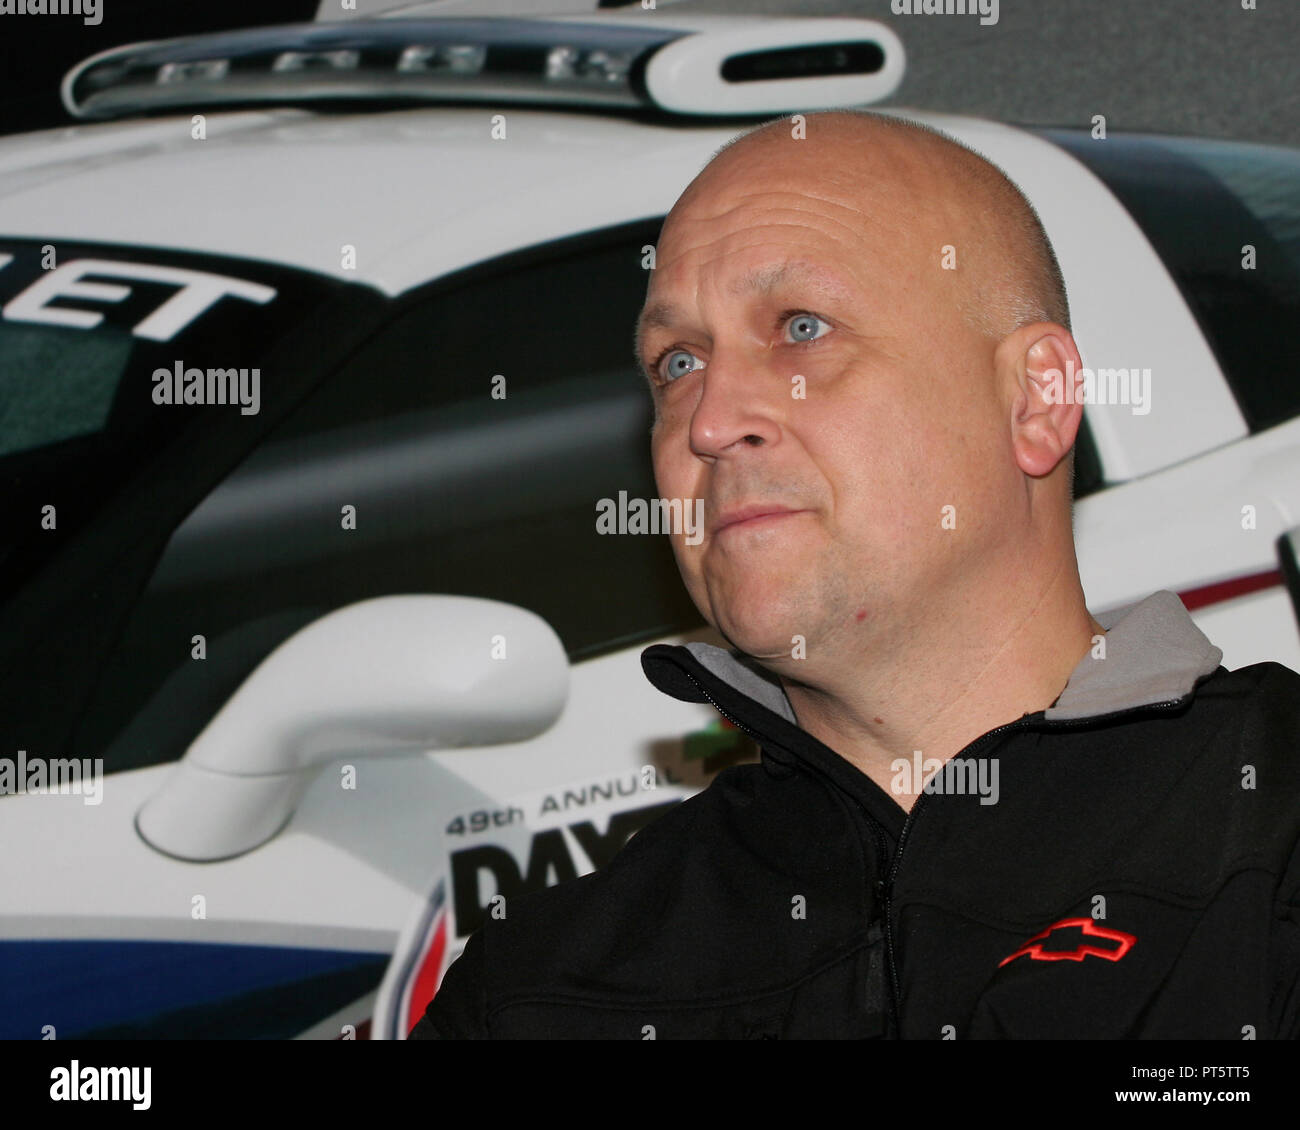 Hall of Fame baseball legend Cal Ripken Jr  is introduced to the media as he will drive the pace car for the Daytona 500 at Daytona International Speedway in Daytona Beach, Florida on February 18, 2007. Stock Photo